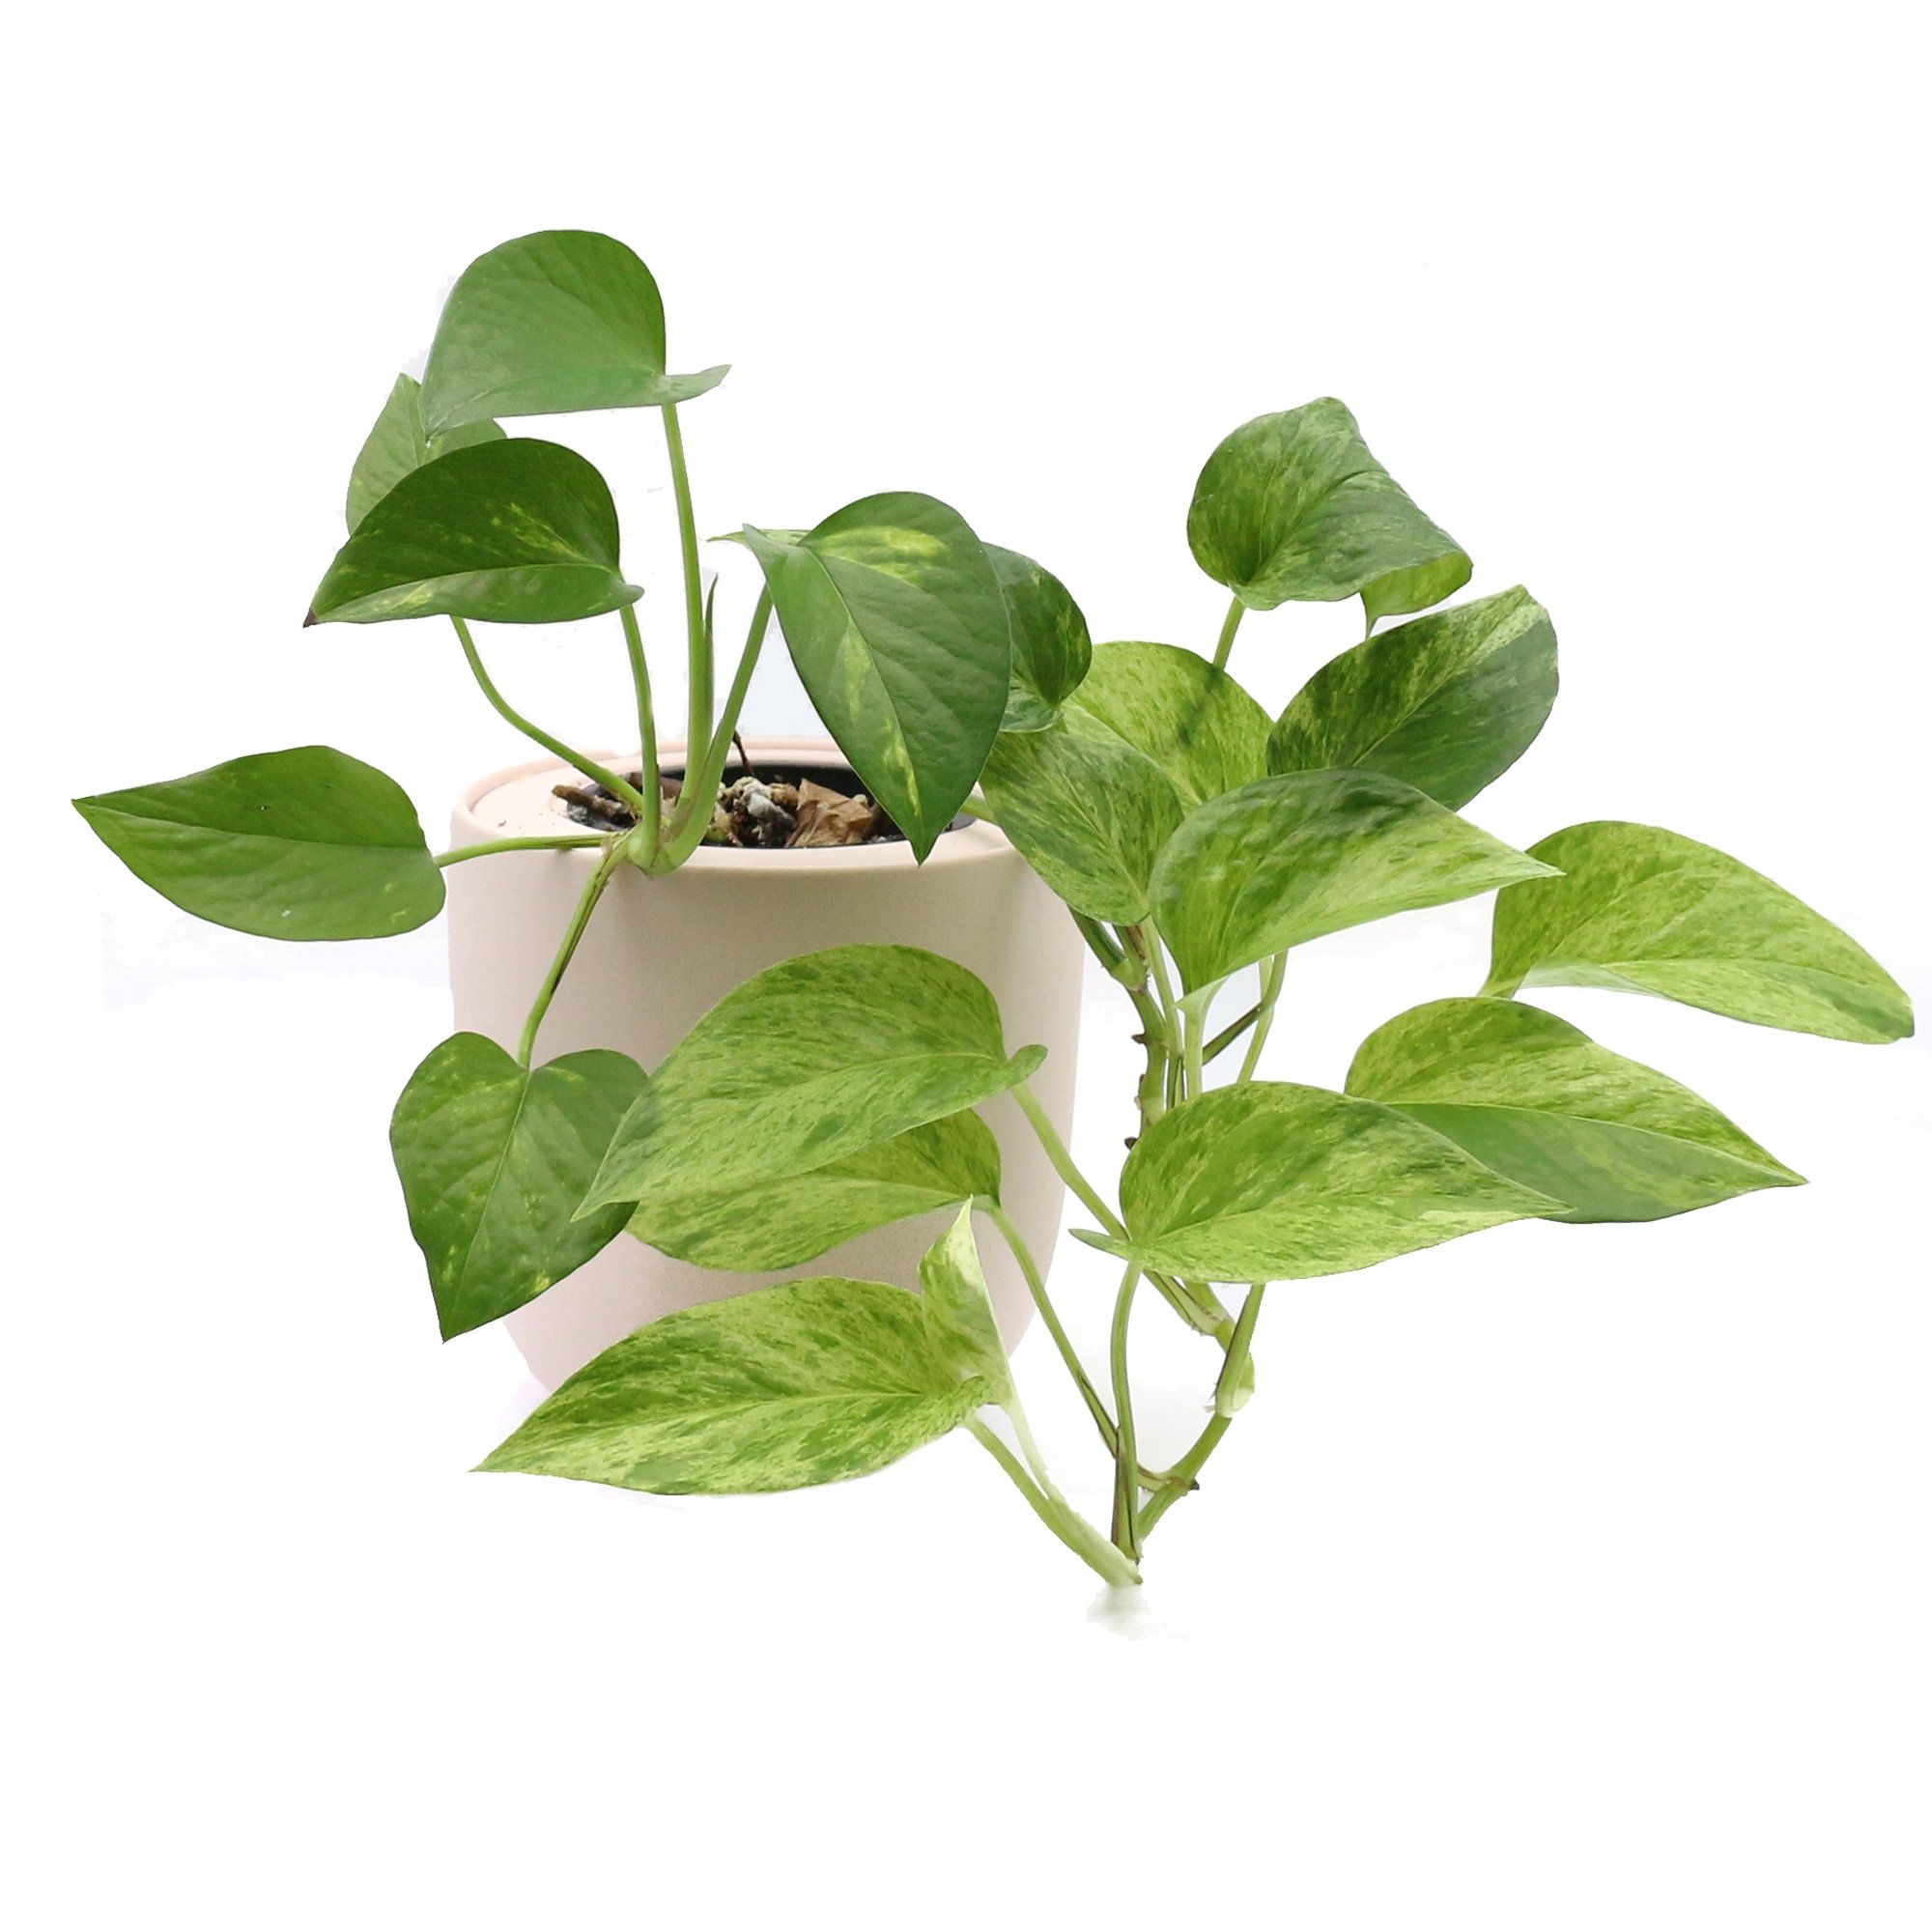 Hydroponic Golden Pothos Live Plants Growing Kit with Pink Ceramic Pot